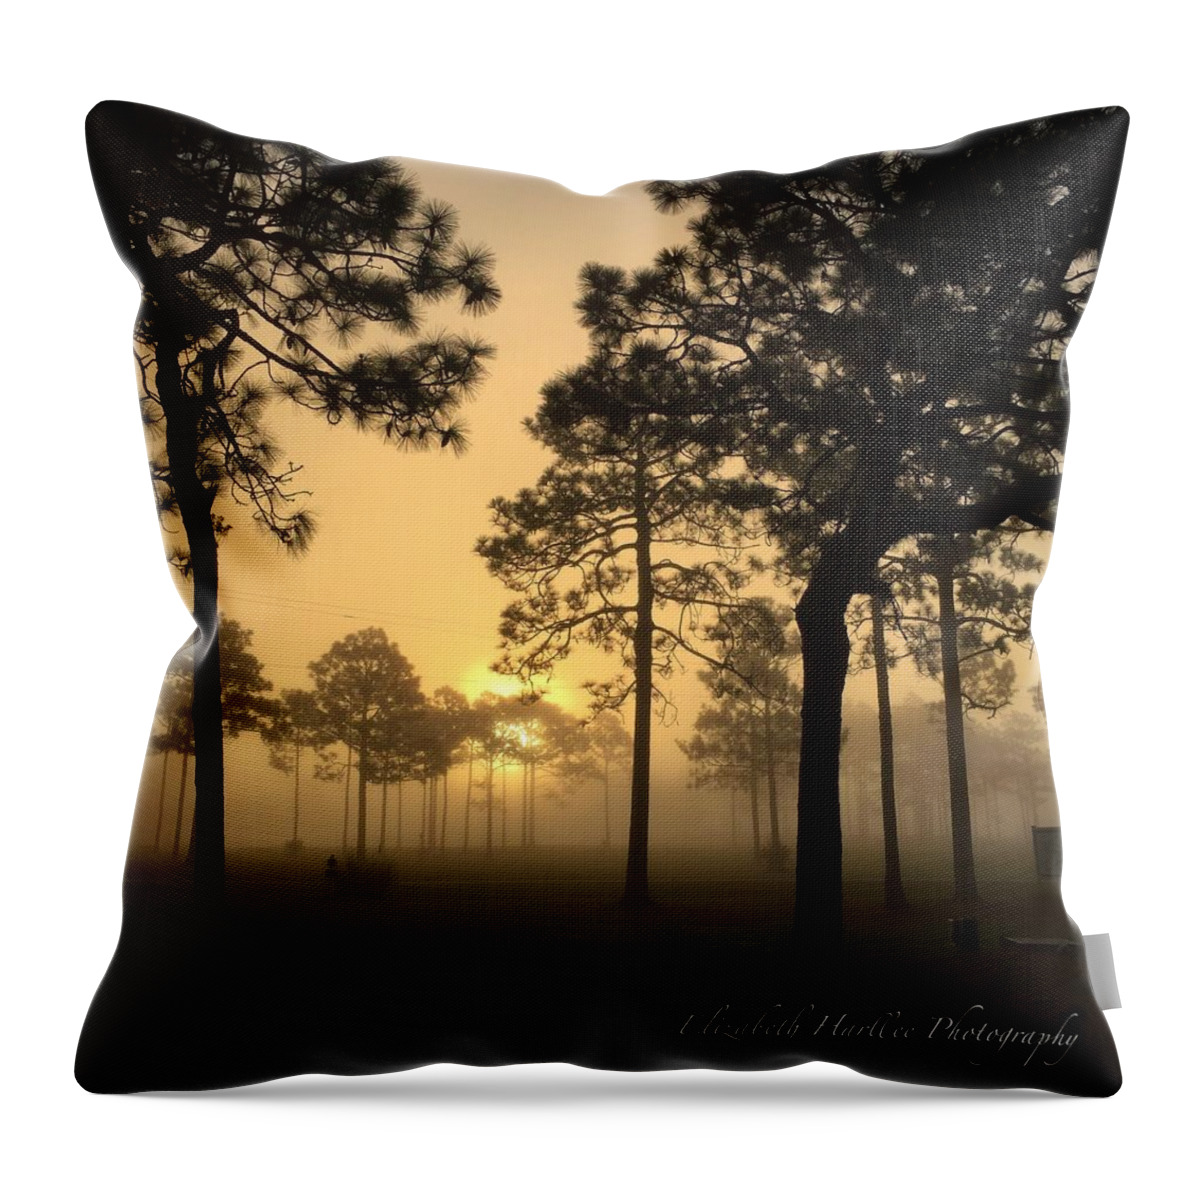  Throw Pillow featuring the photograph Misty Morning by Elizabeth Harllee